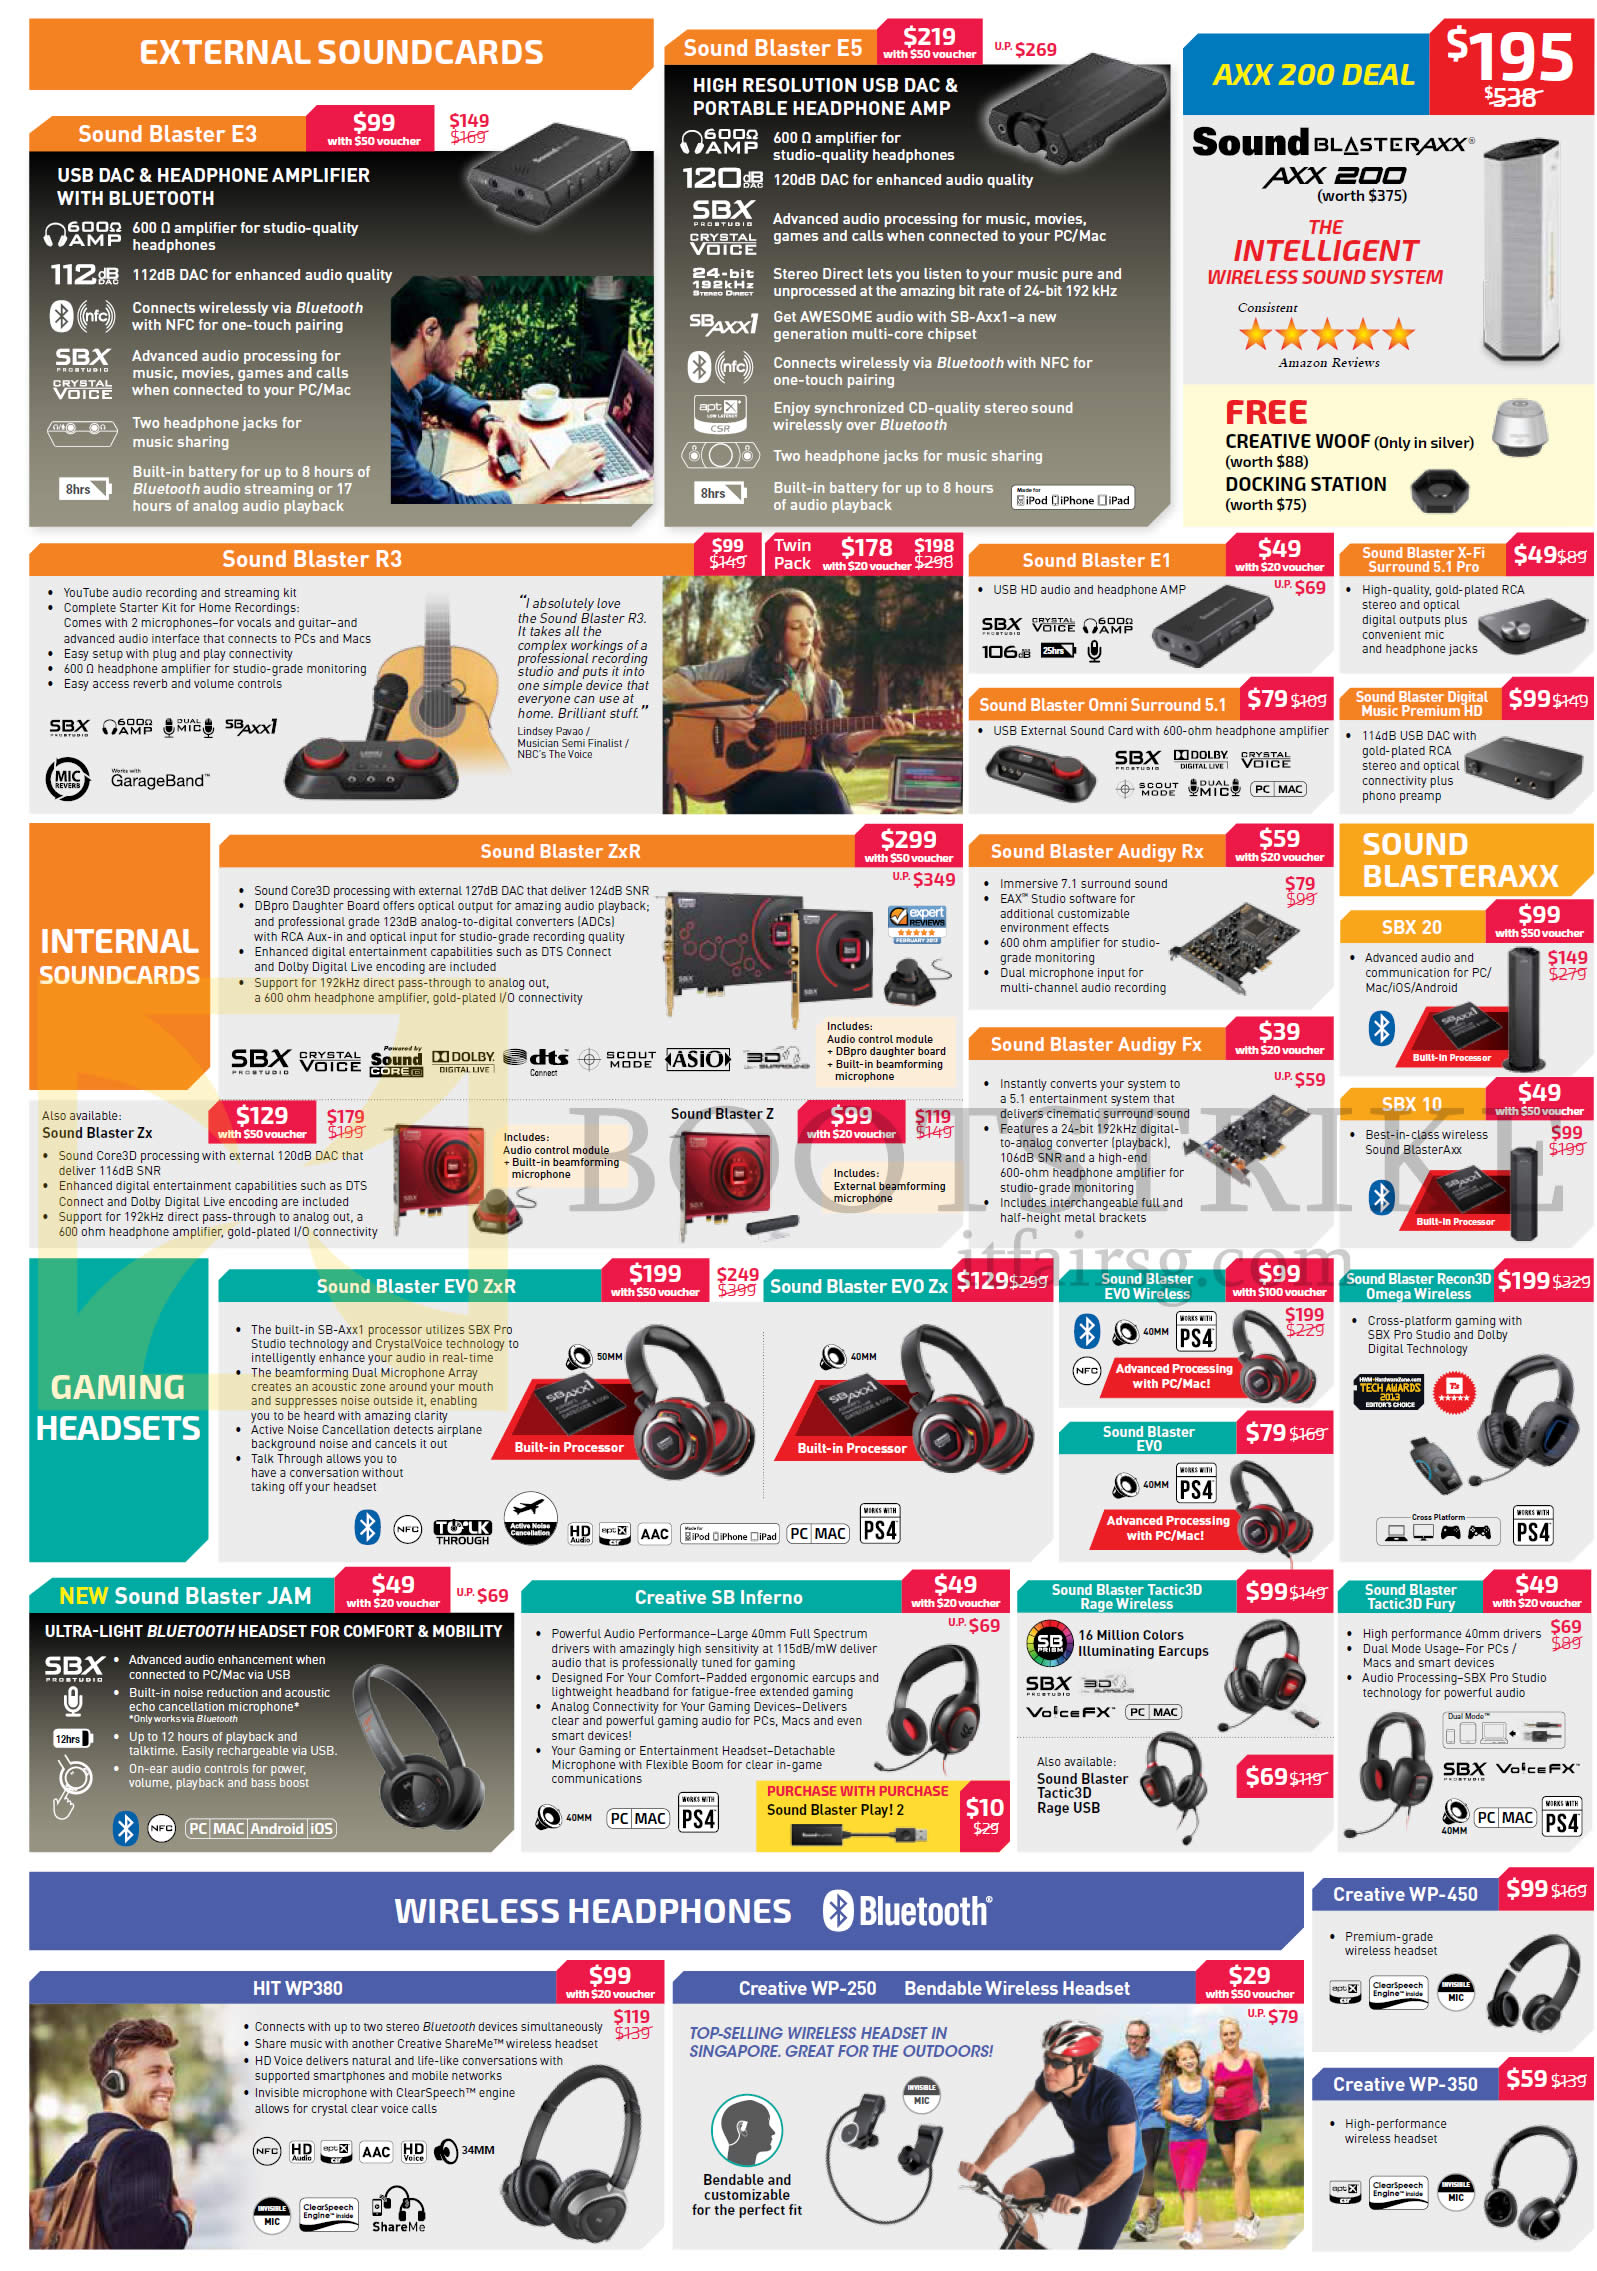 IT SHOW 2015 price list image brochure of Creative Internal, External Sound Cards, Gaming Headsets, Wireless Headphones, Sound Blaster R3, E1, Evo ZxR, Evo Zx, Headset WP-450, WP-350, WP-250